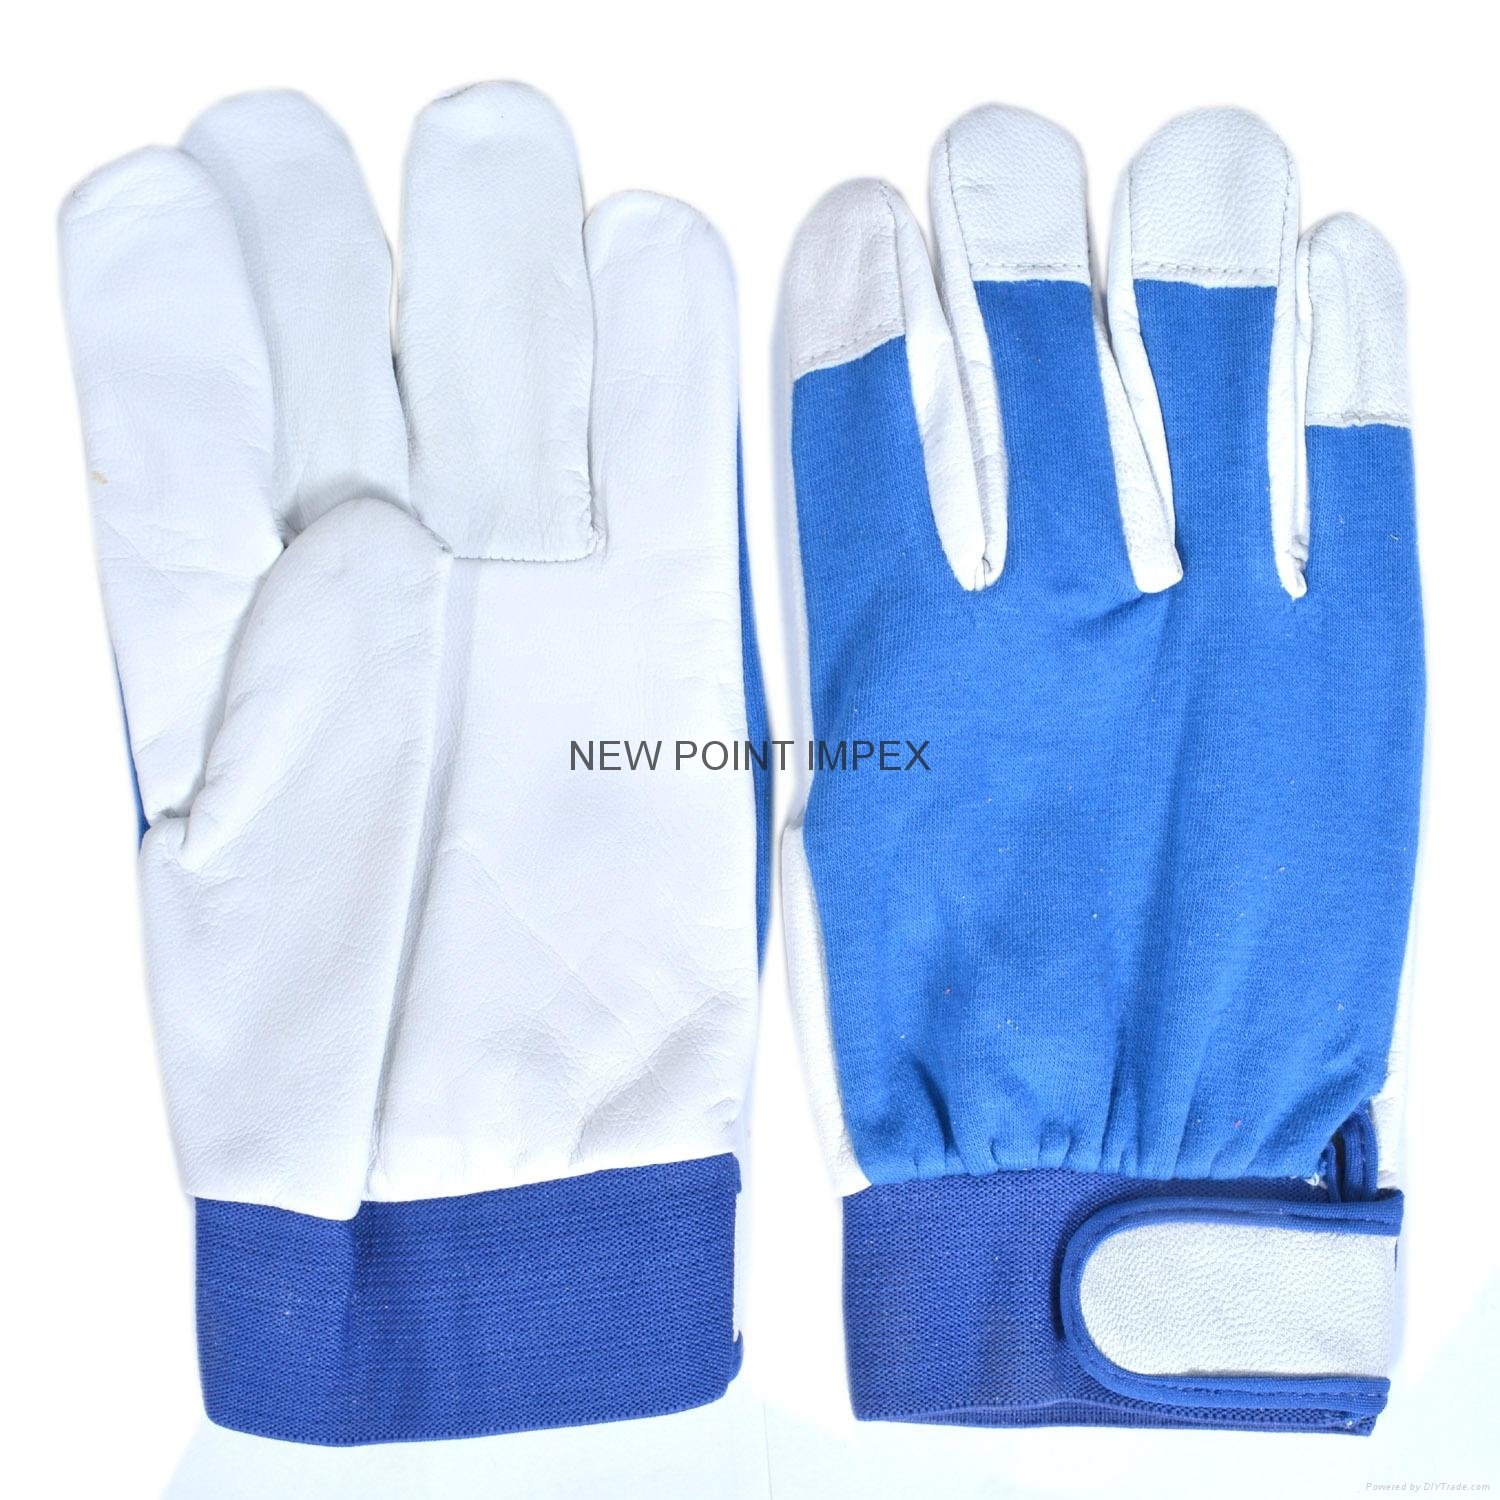 Mechanic Gloves made of goat leather  back elasticated cloth Velcro Closure